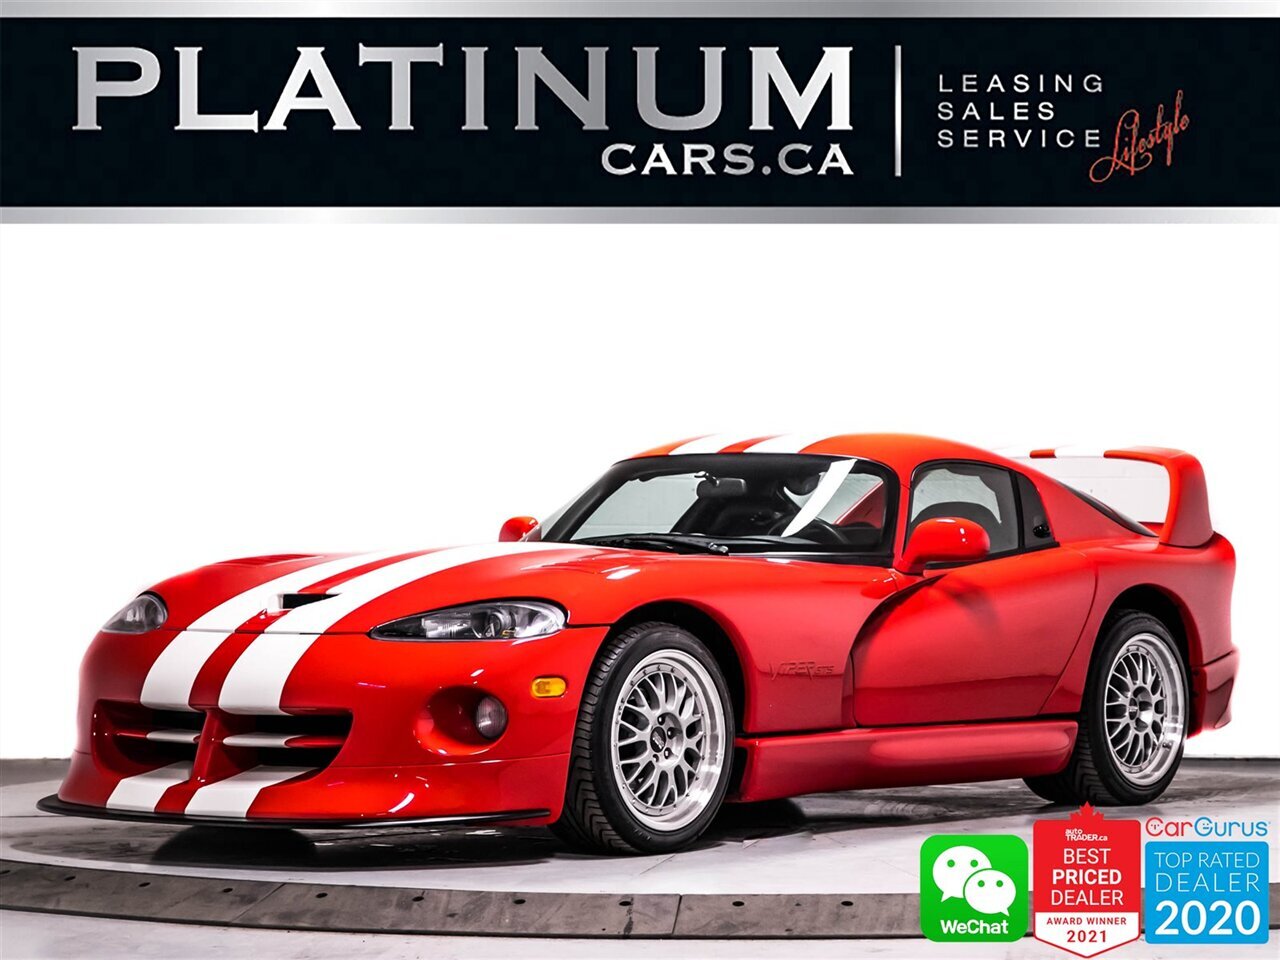 2002 Dodge Viper GTS, FINAL EDITION 014 of 360, V10, HENNESSEY